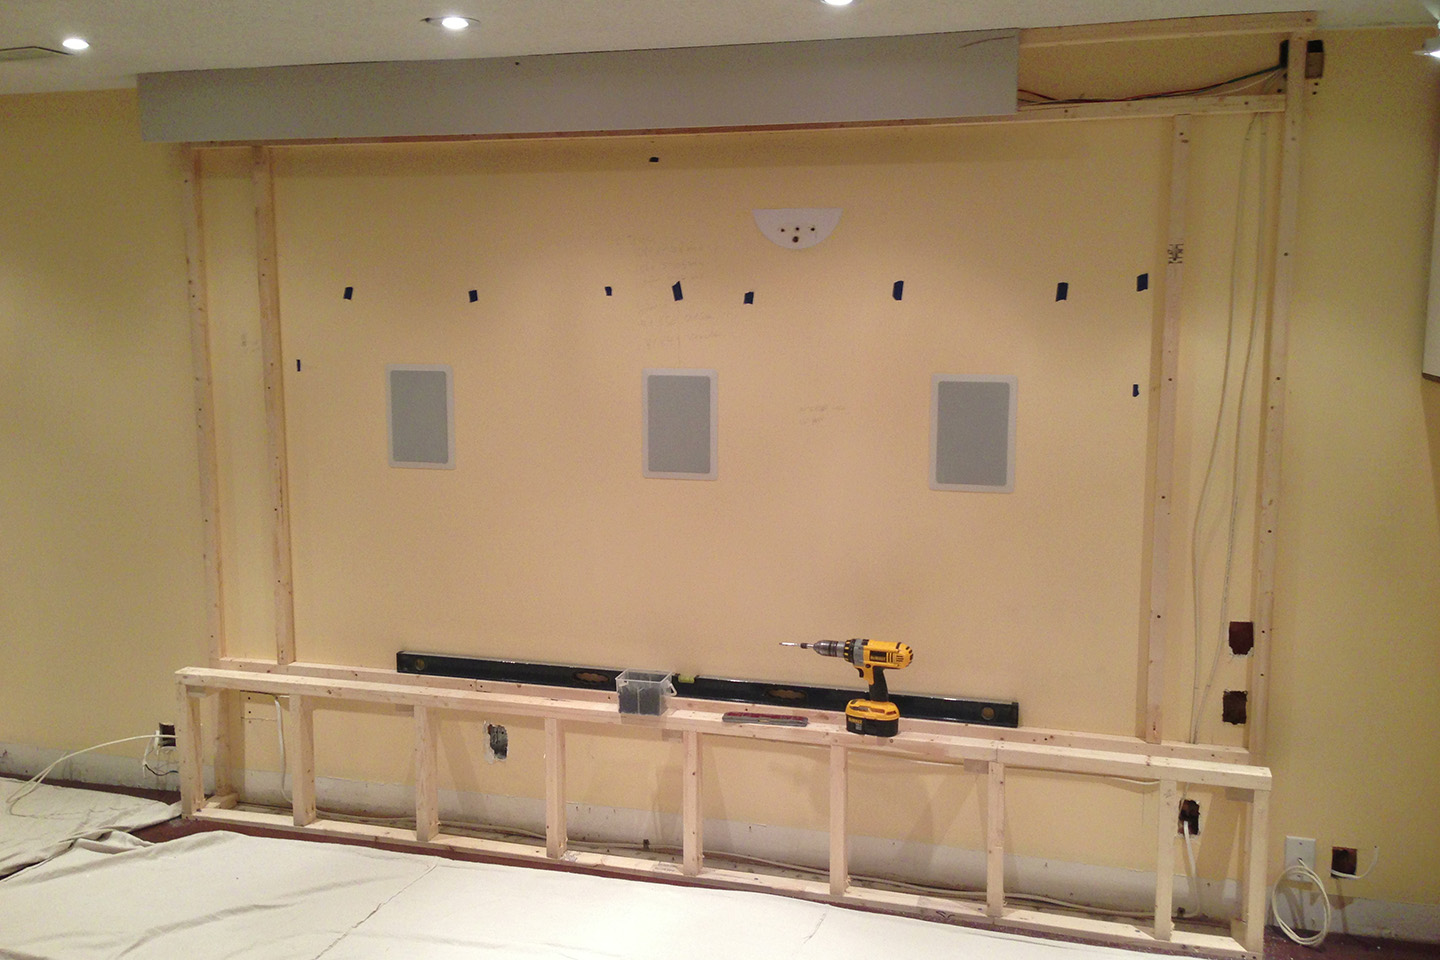 In Wall Speakers and Framing for Perforated Projection Screen Install